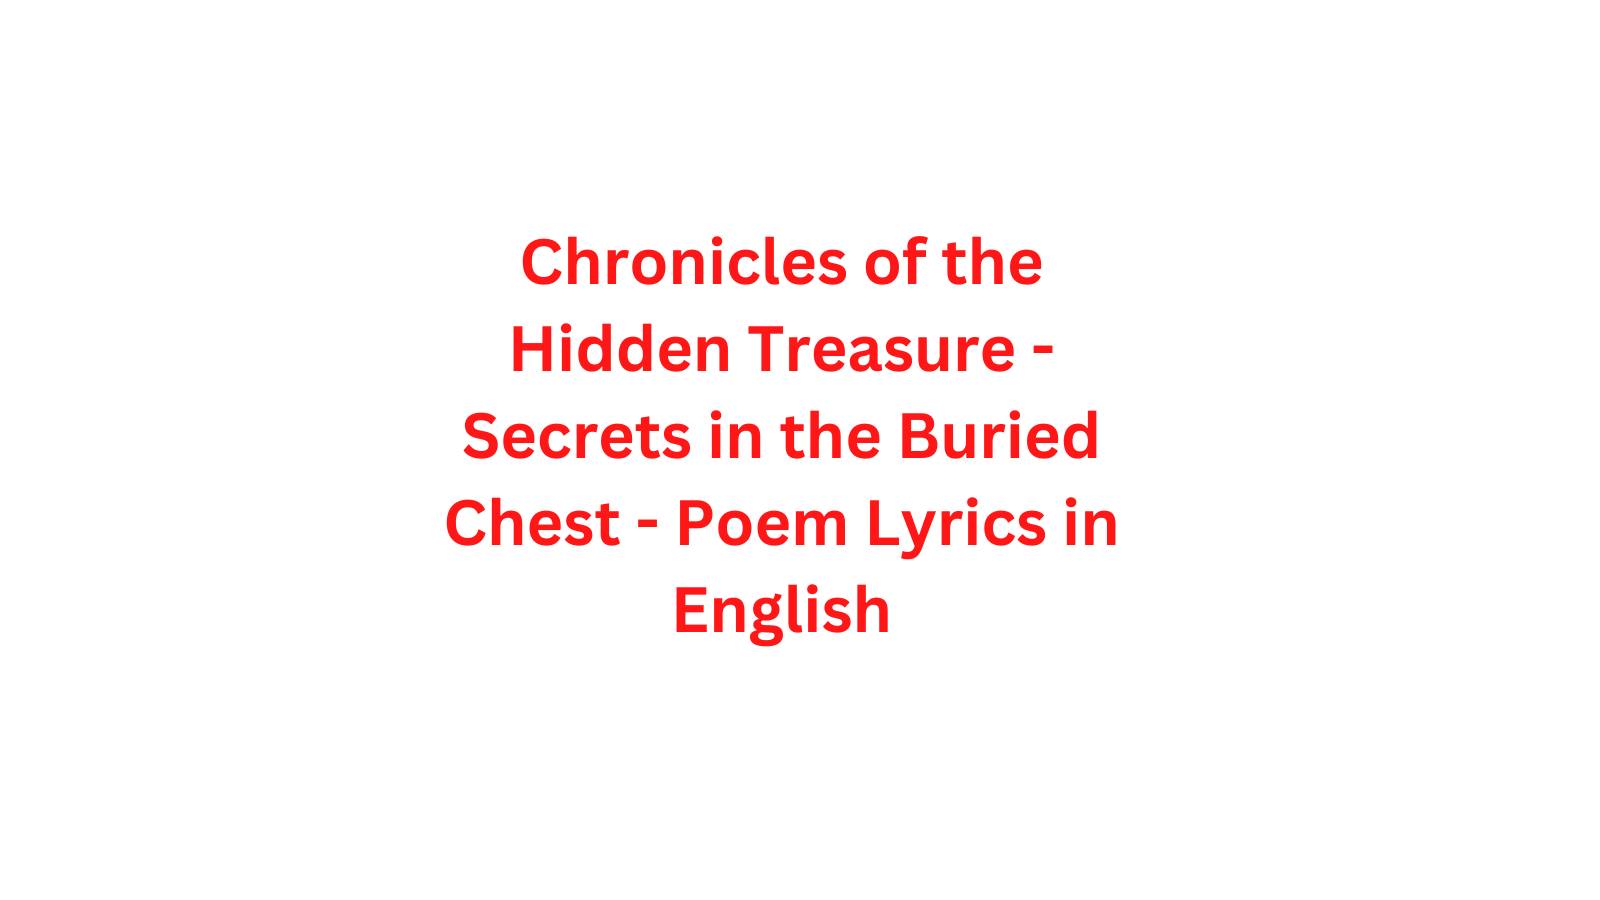 Chronicles of the Hidden Treasure - Secrets in the Buried Chest